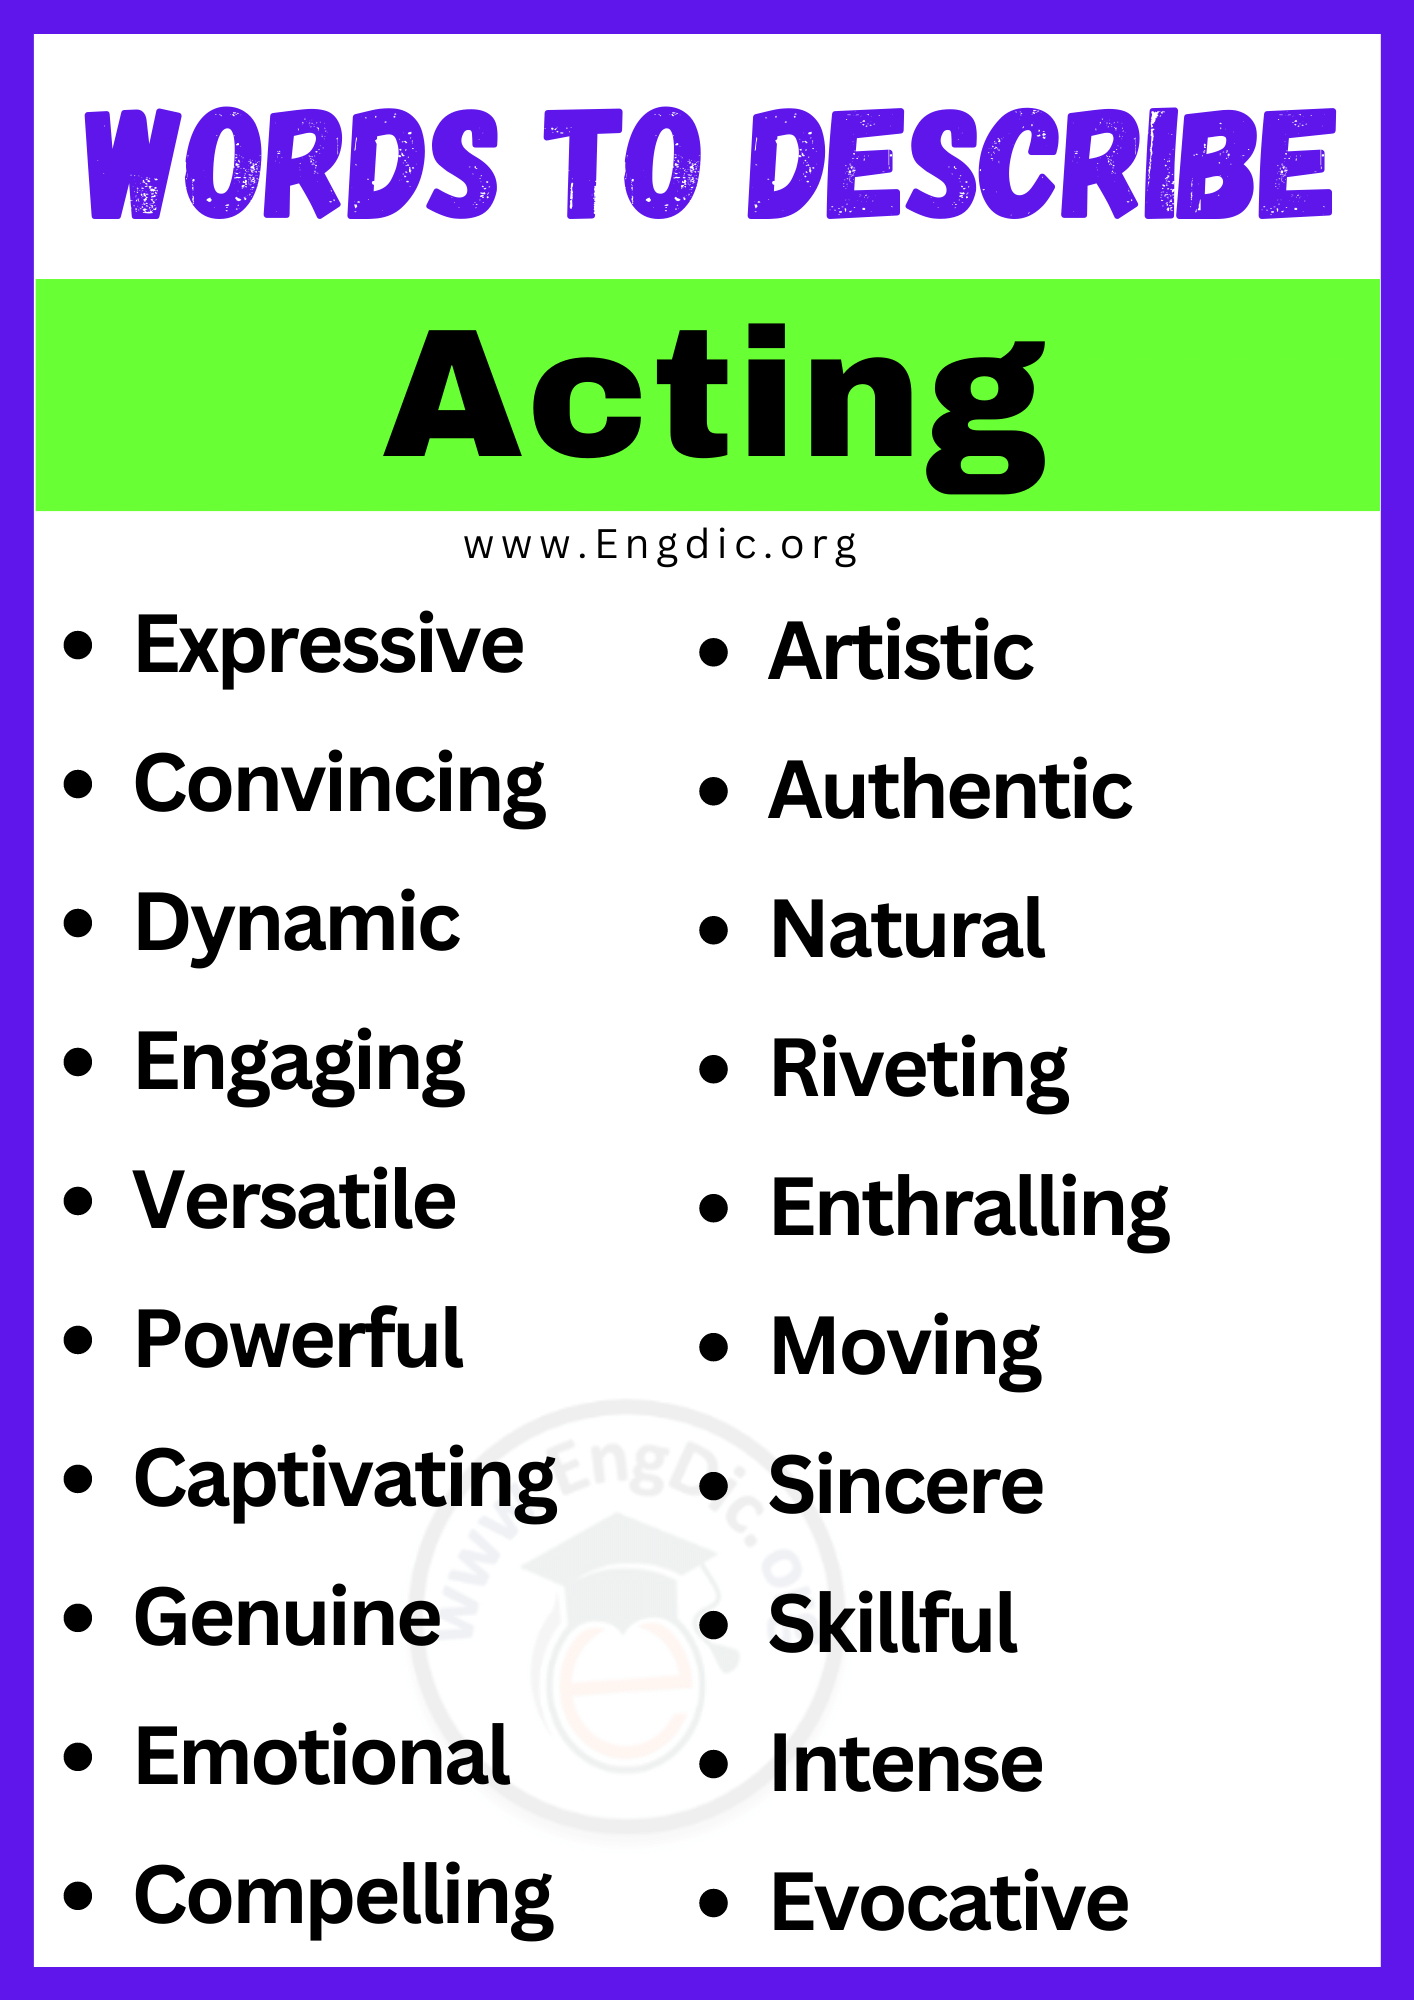 Words to Describe Acting